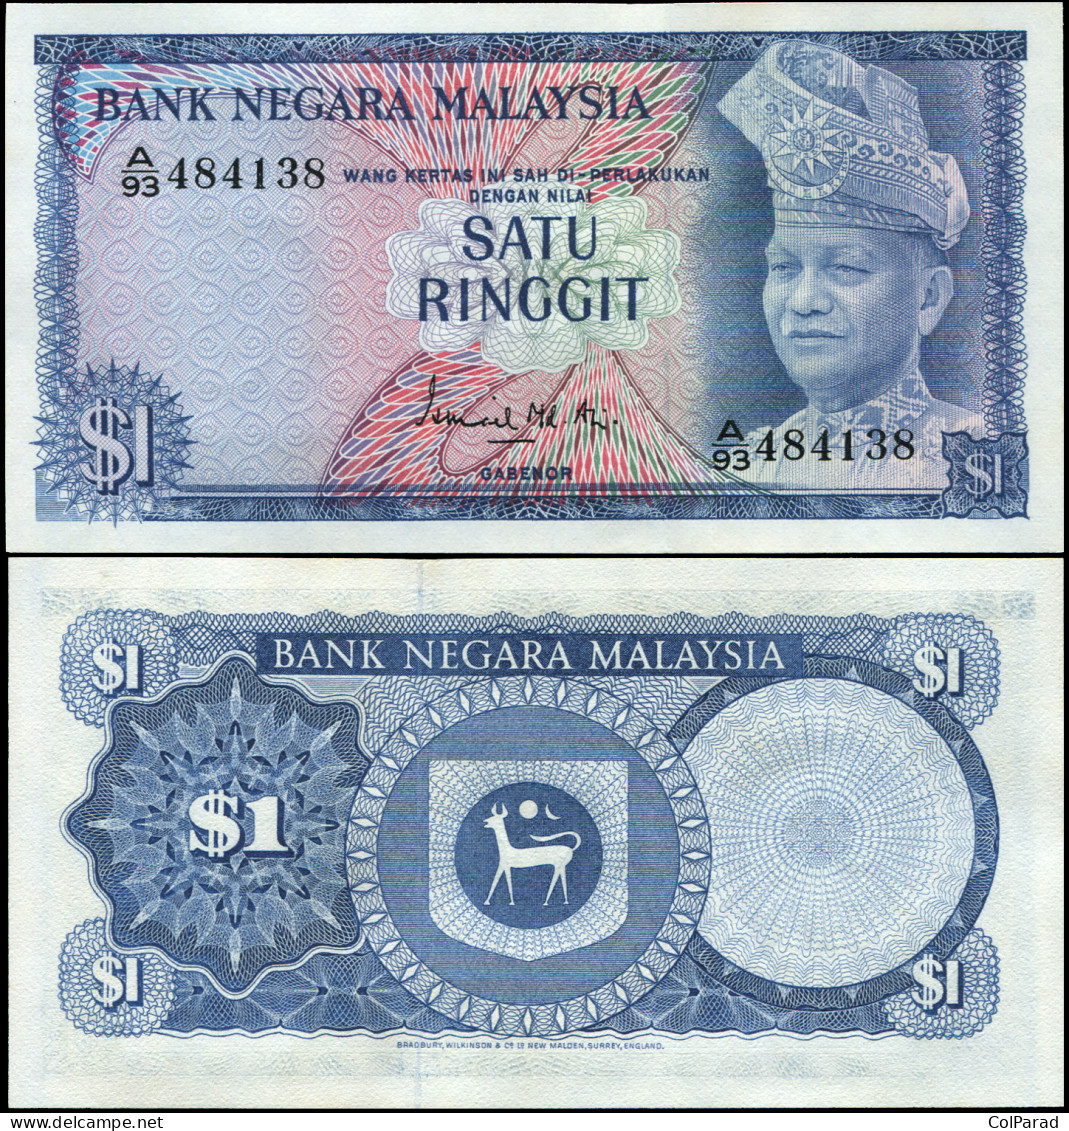 MALAYSIA 1 RINGGIT - ND (1967) - Paper Unc - P.1a Banknote - Malaysia